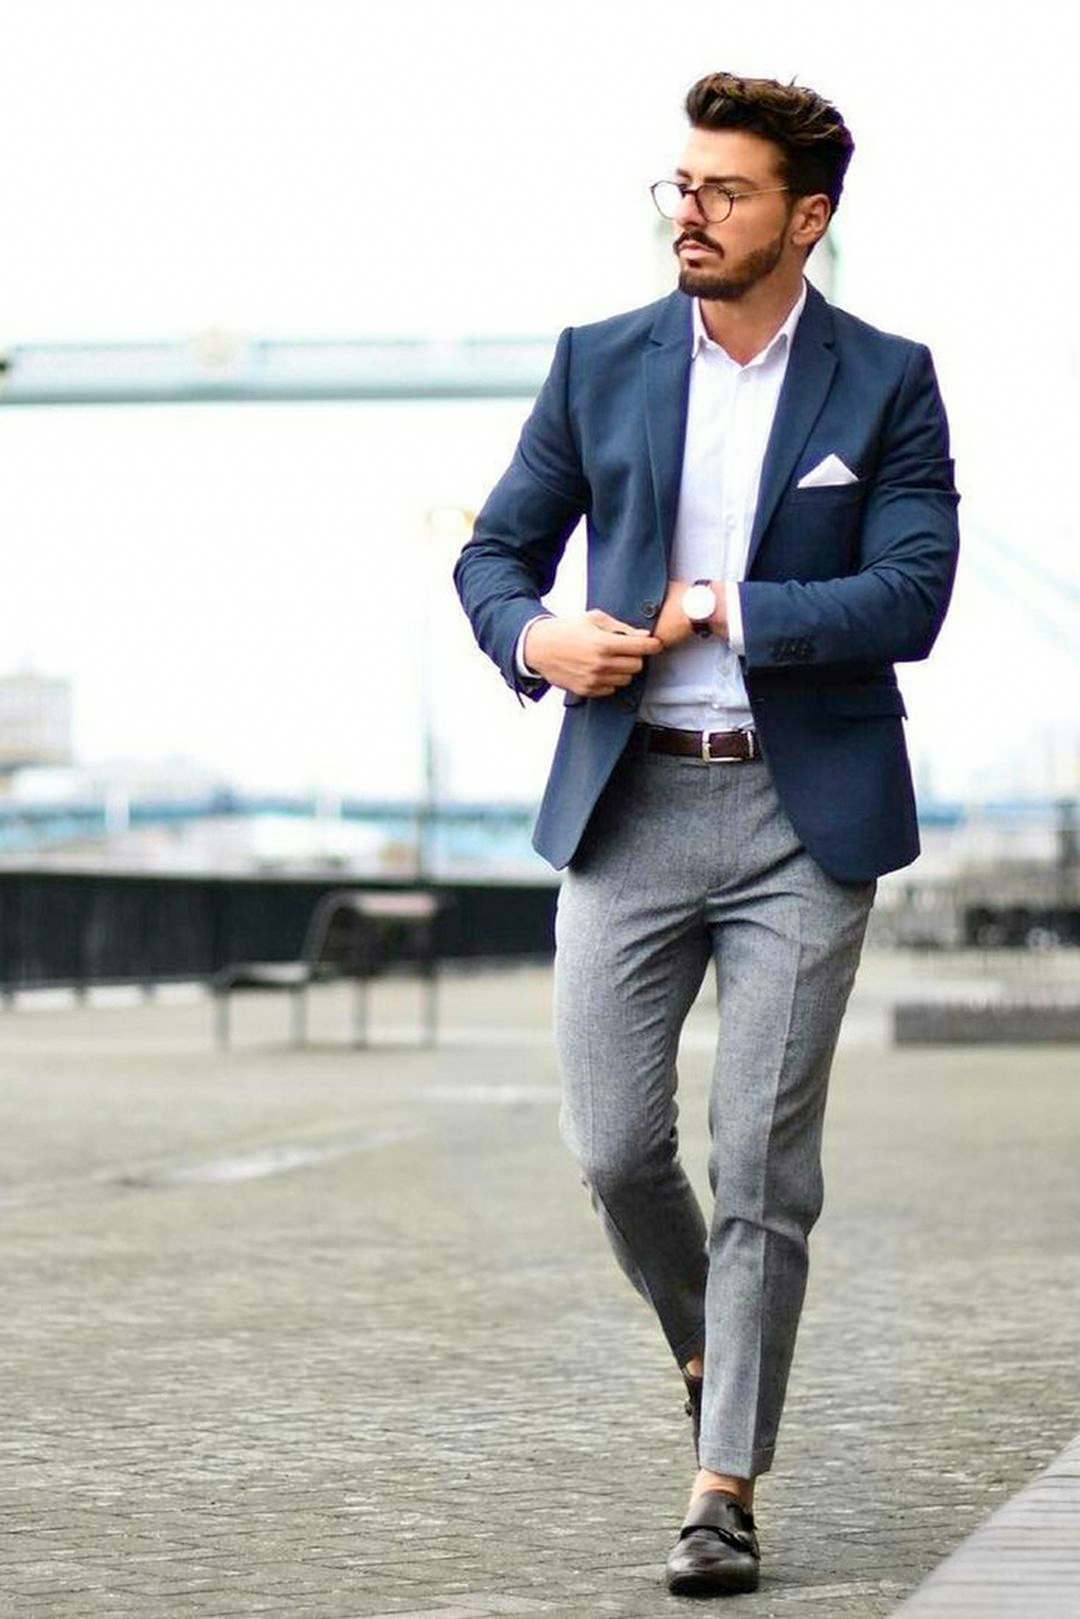 smart-casual attire sample: separating the blue suit jacket with grey dress pants